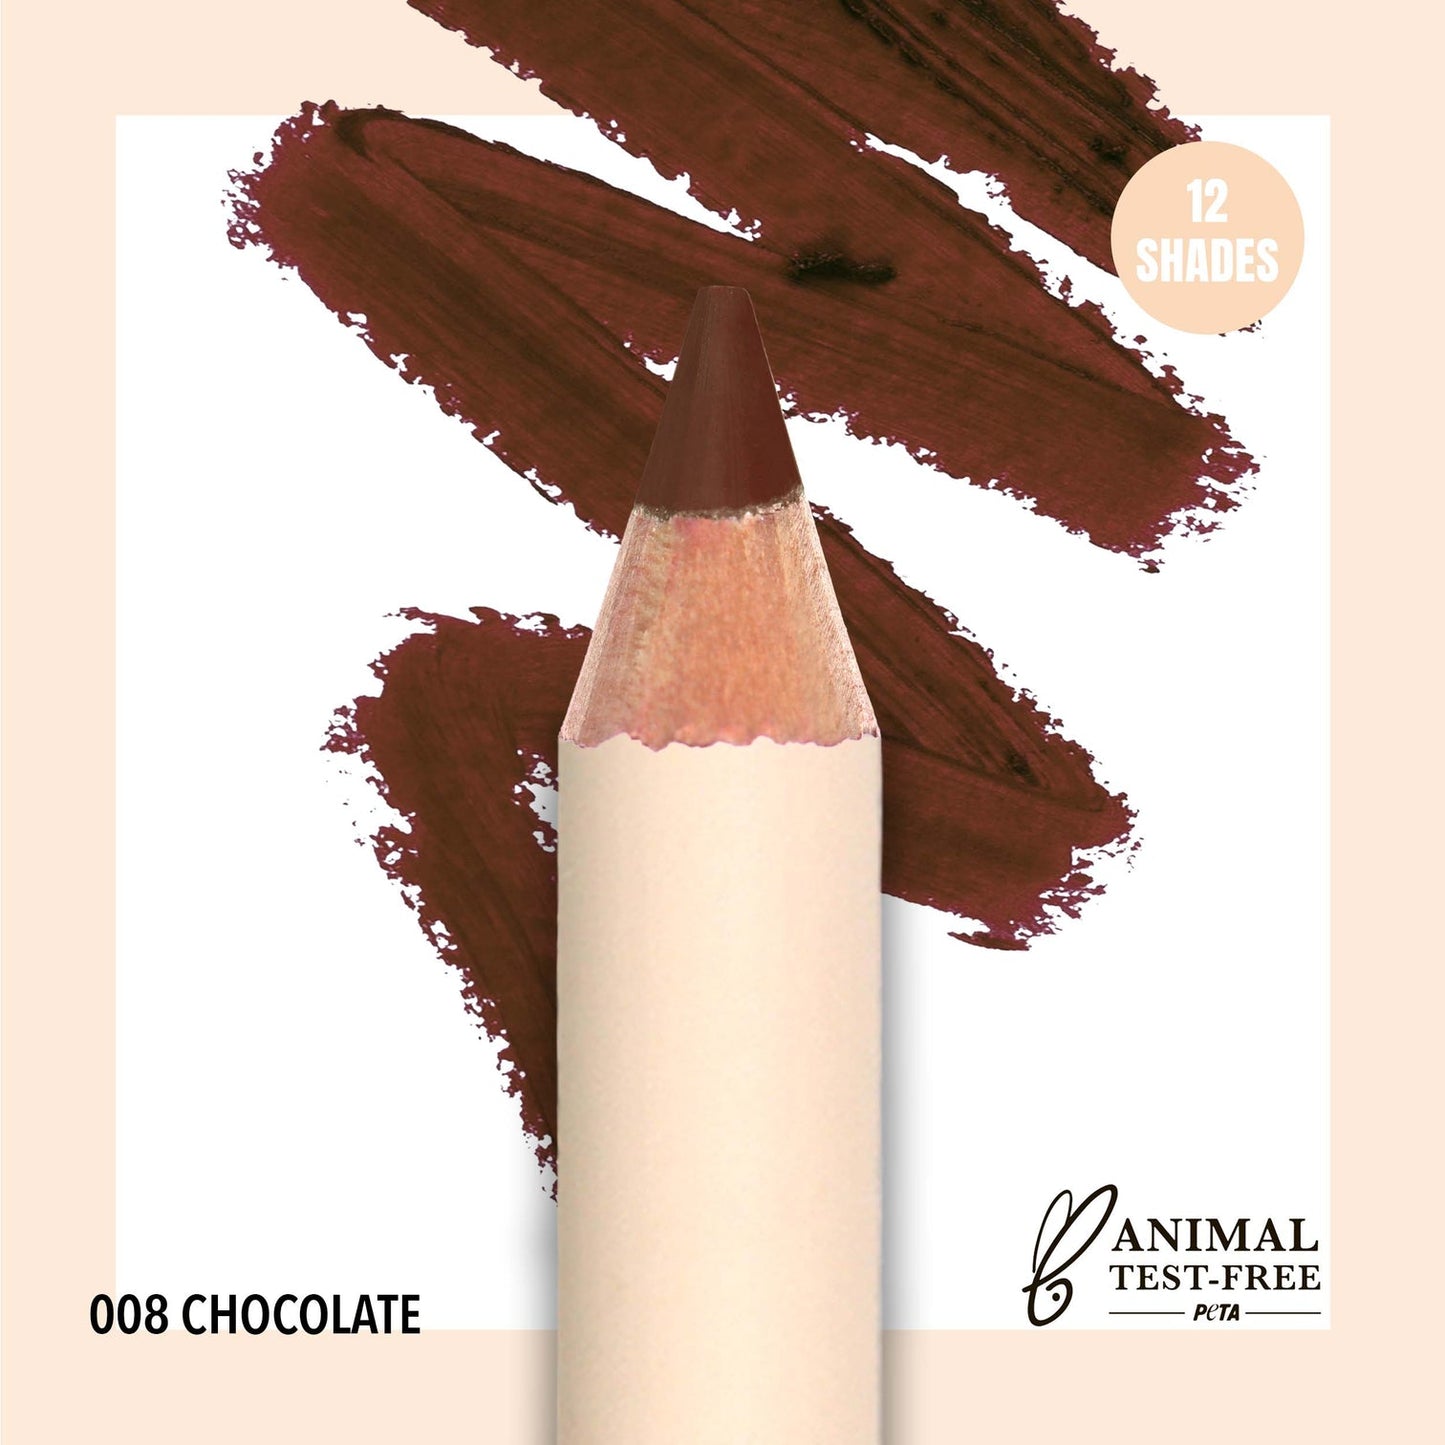 MUST-HAVE LIP LINER - MOIRA